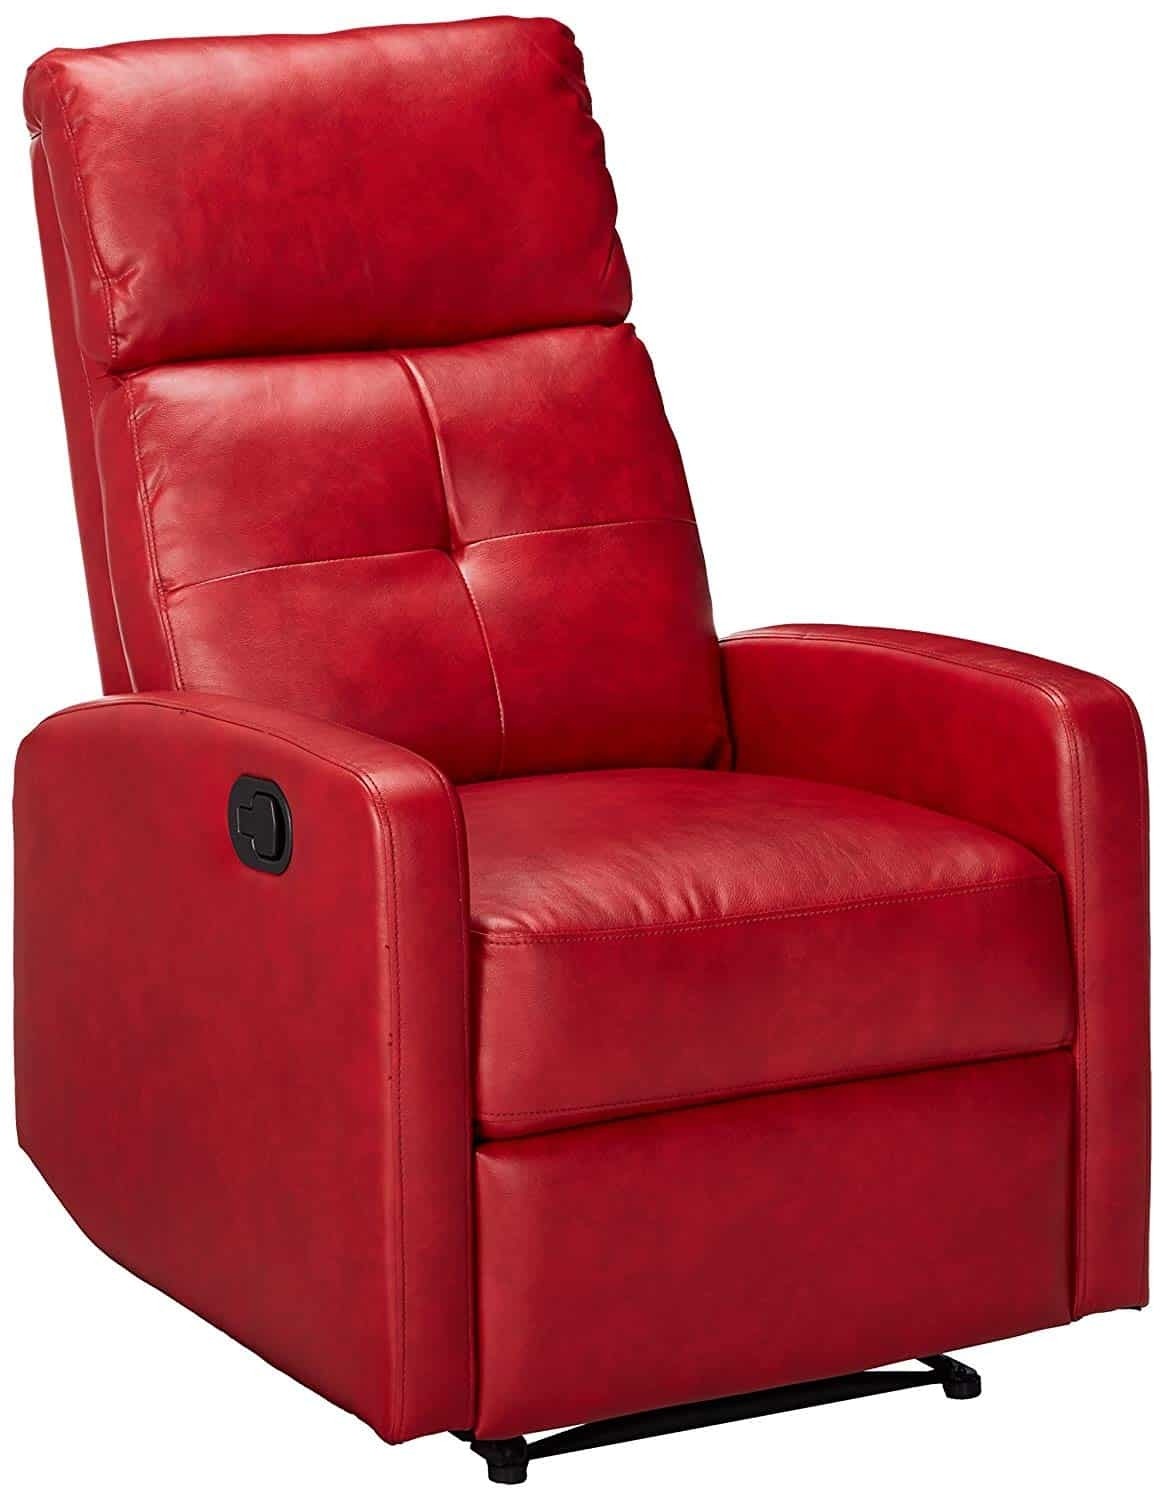 Top 10 red leather recliner chairs 2020 reviews guide 1